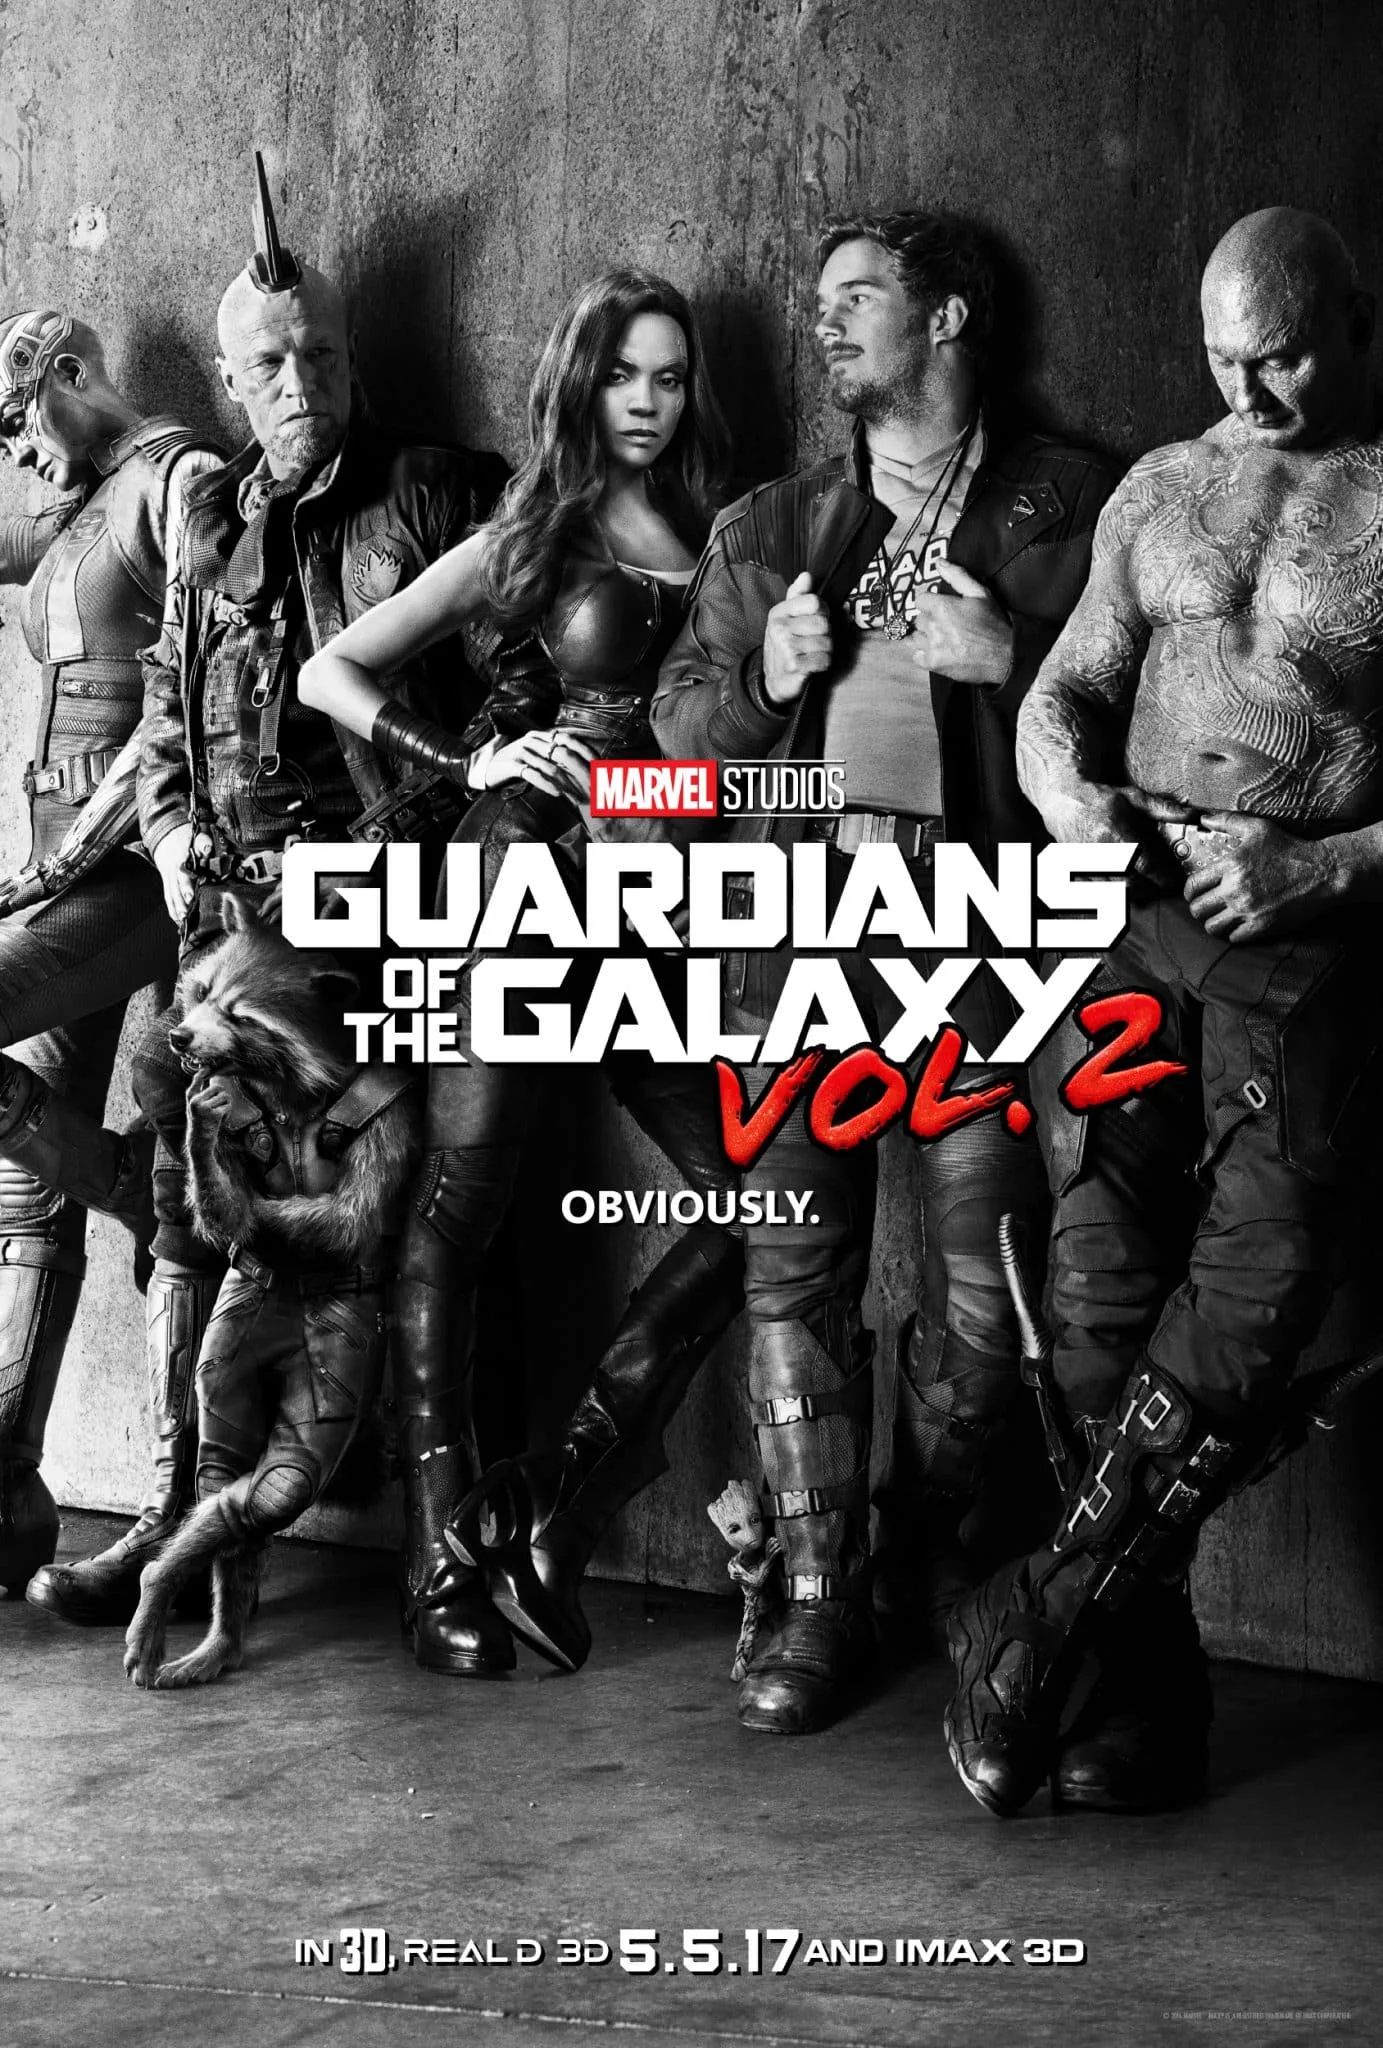 GUARDIANS OF THE GALAXY VOL. 2 - New Poster & Sneak Peek Now Available | ThisNThatwithOlivia.com #GotGVol2